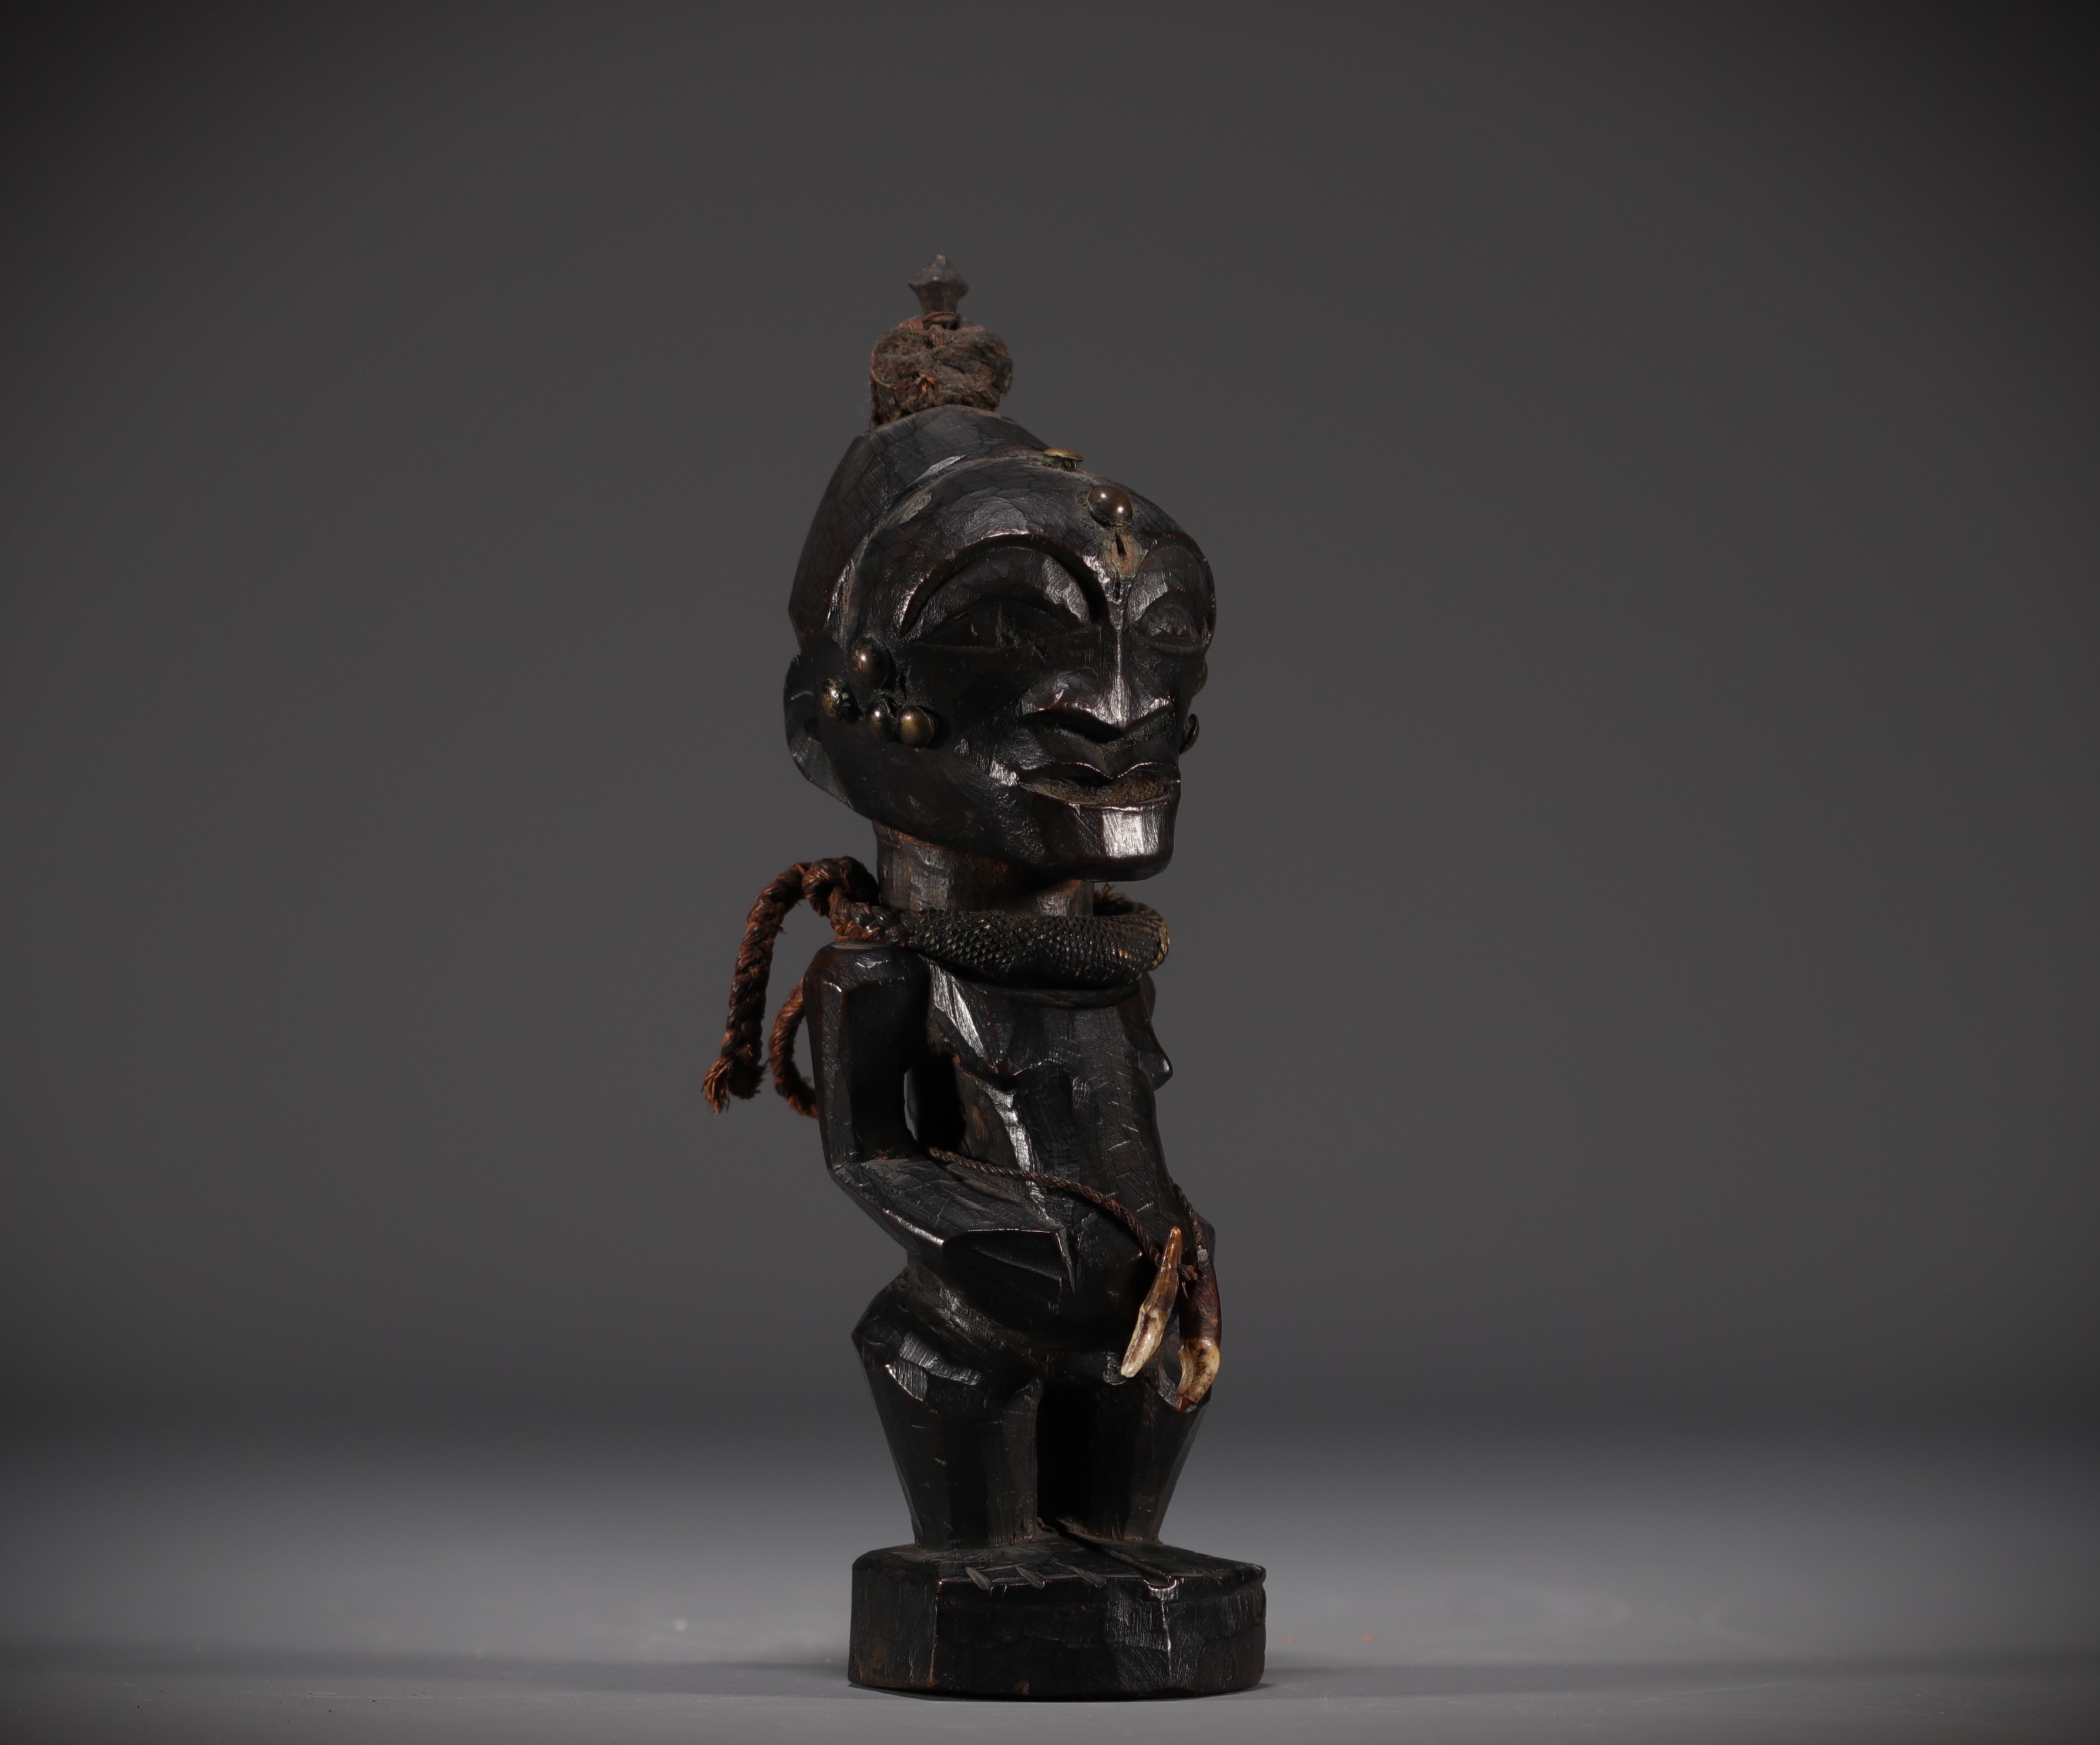 SONGYE ritual figure - collected around 1900 - Rep.Dem.Congo - Image 3 of 7